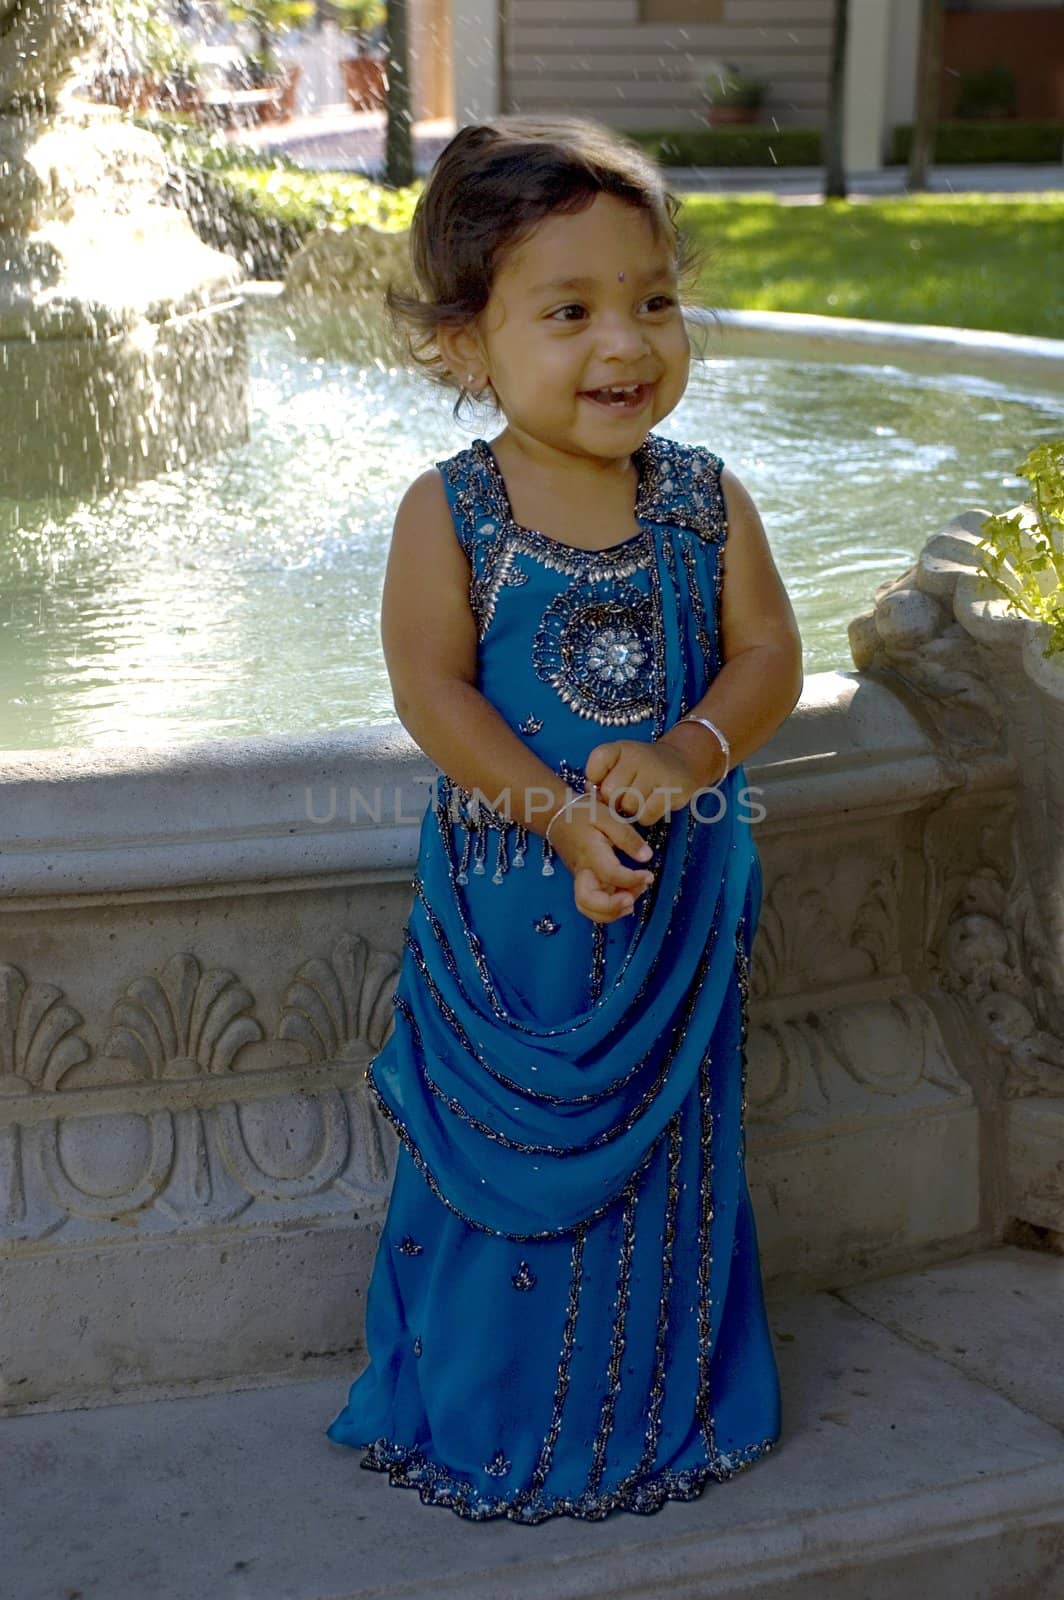 A little Indian girl in her sari standing at the fountain.